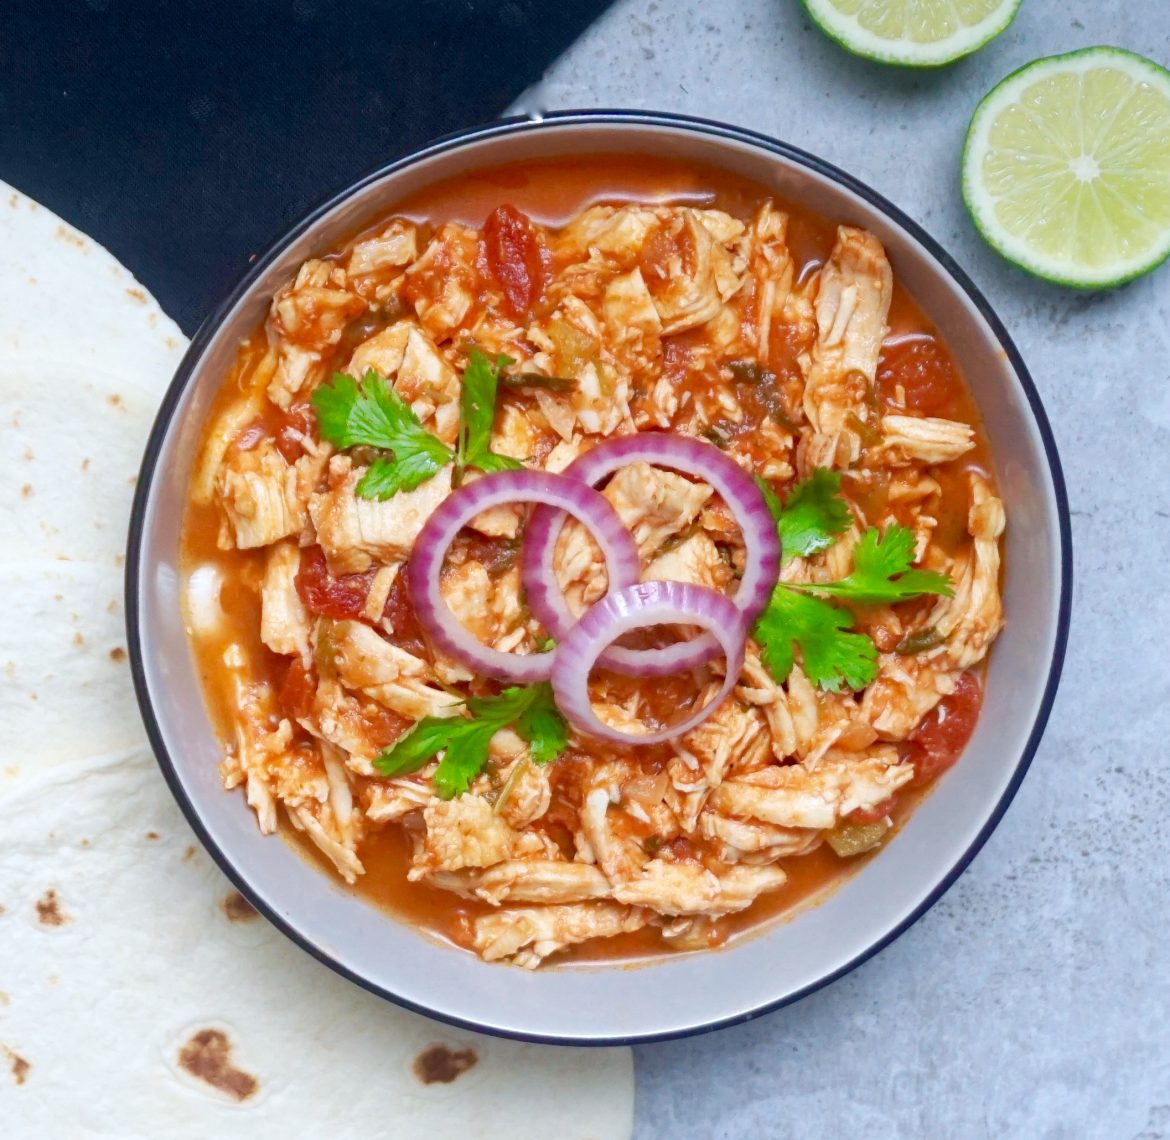 This easy Cinco de Mayo meal plan is an easy to prepare dinner